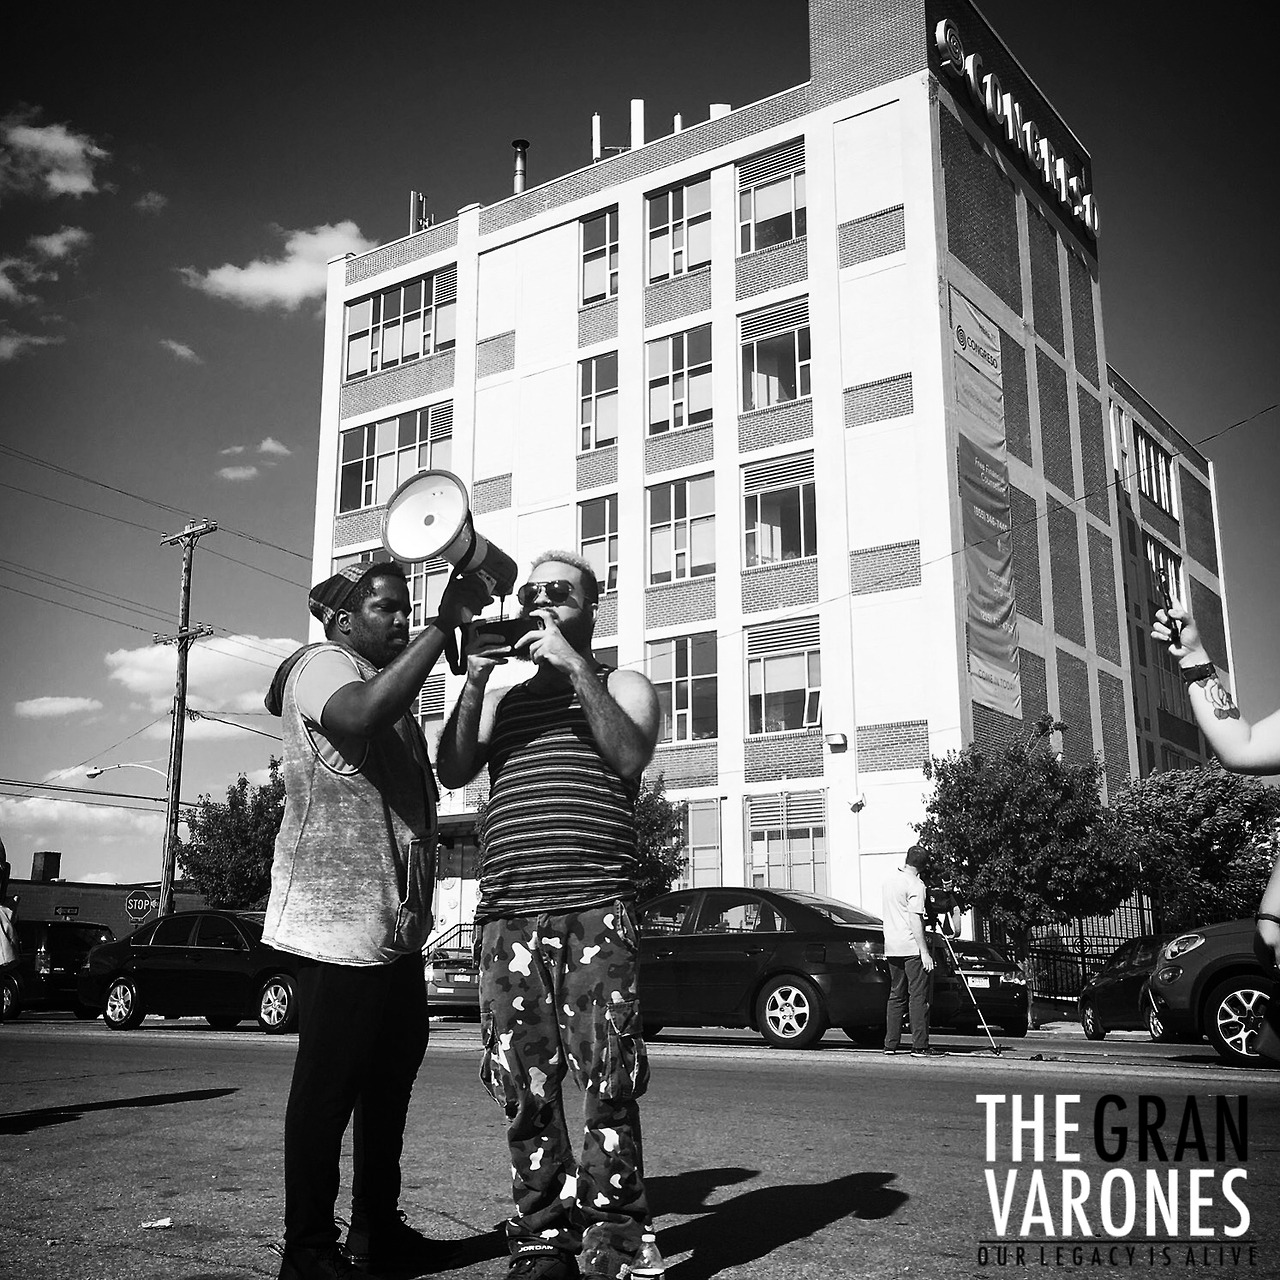 My name is Alexander Velez and I am representing the Gran Varones. The Gran Varones is a legacy project that uses the art of storytelling to lift the voices of Latino & Afro-Latino Gay, Queer and Trans men. We stand alongside with Juntos, the Black...